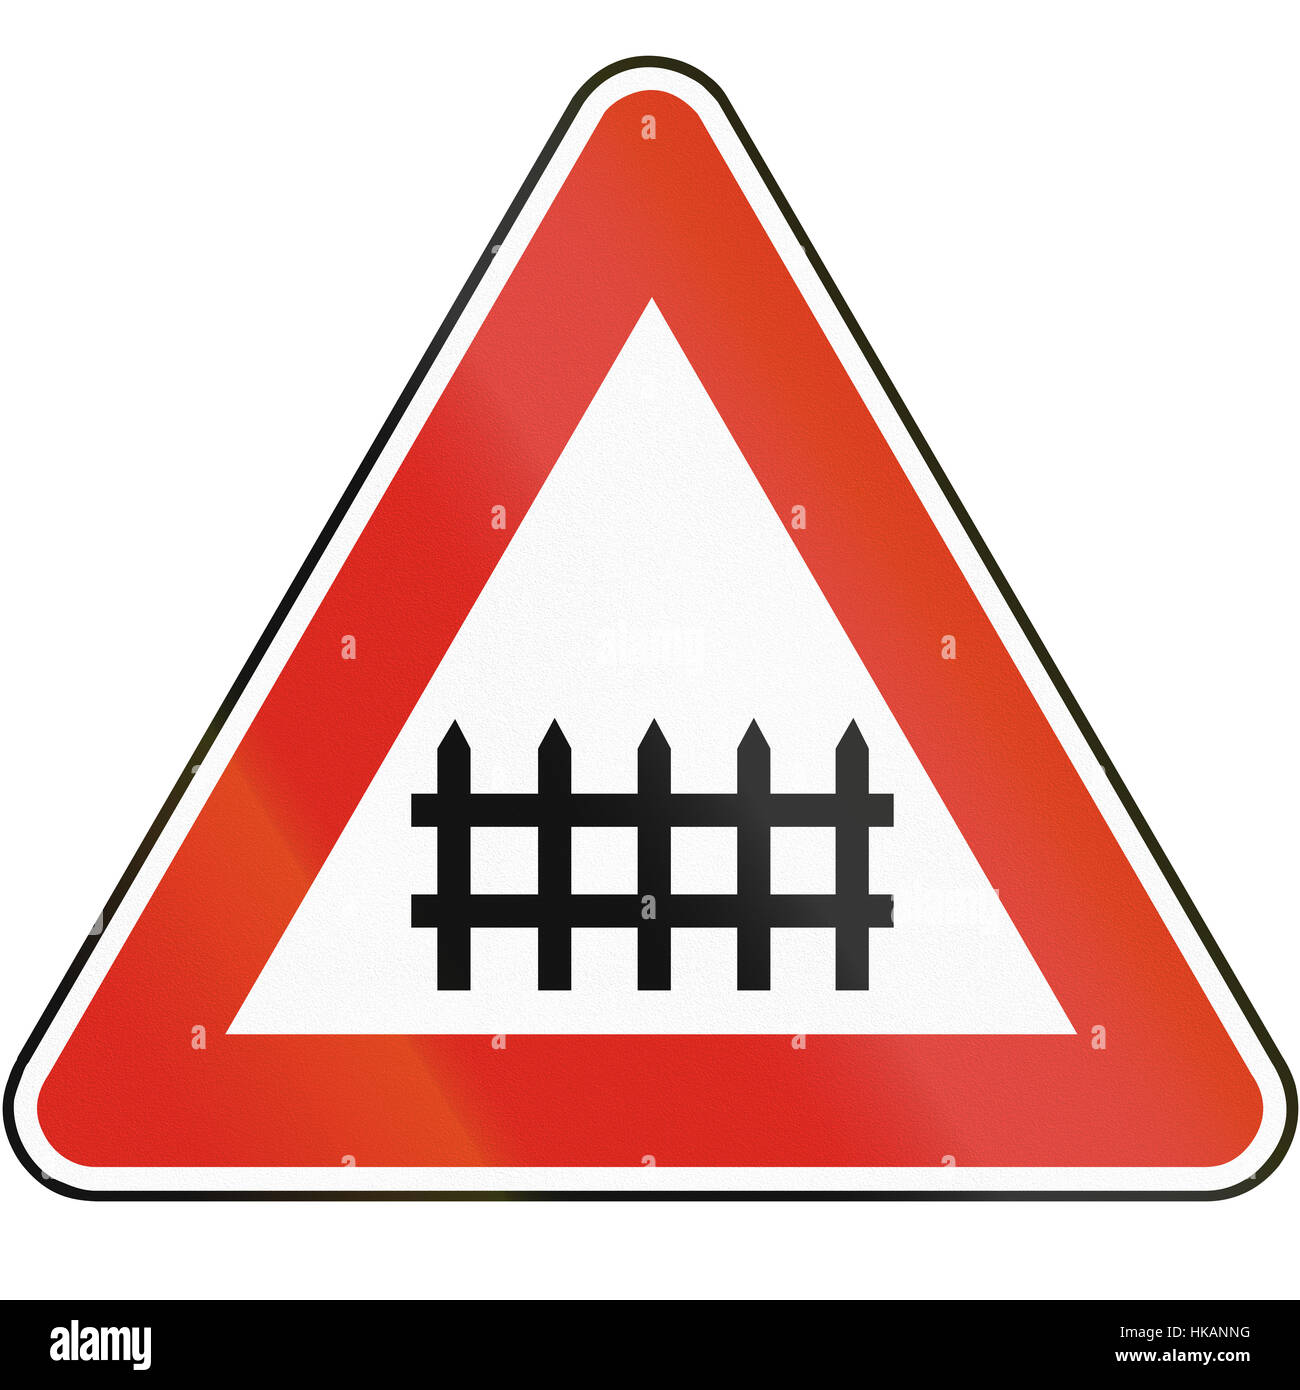 Road sign used in Slovakia - Level crossings with barriers. Stock Photo